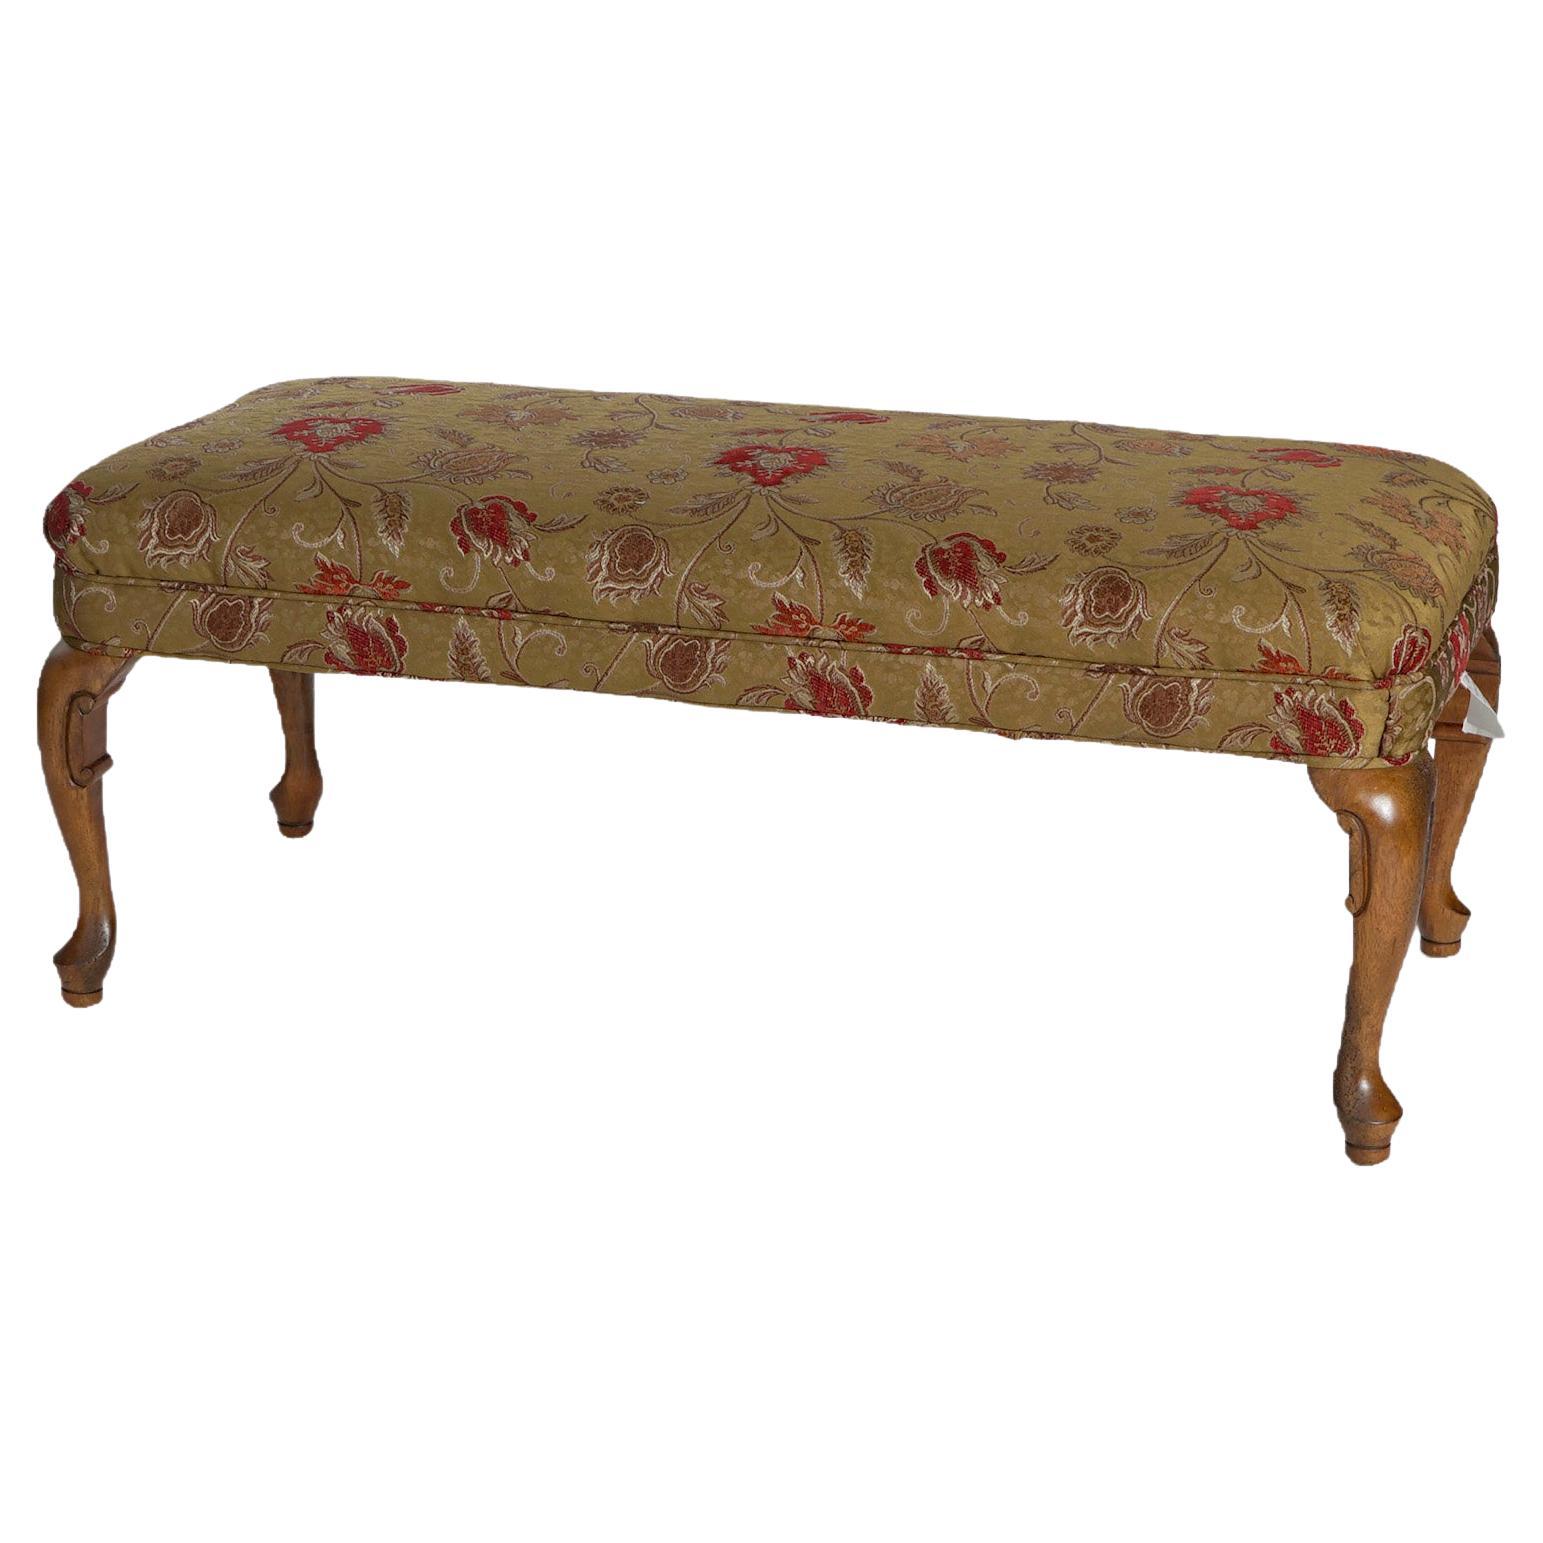 Queen Anne Style Upholstered Mahogany Long Bench 20th C For Sale